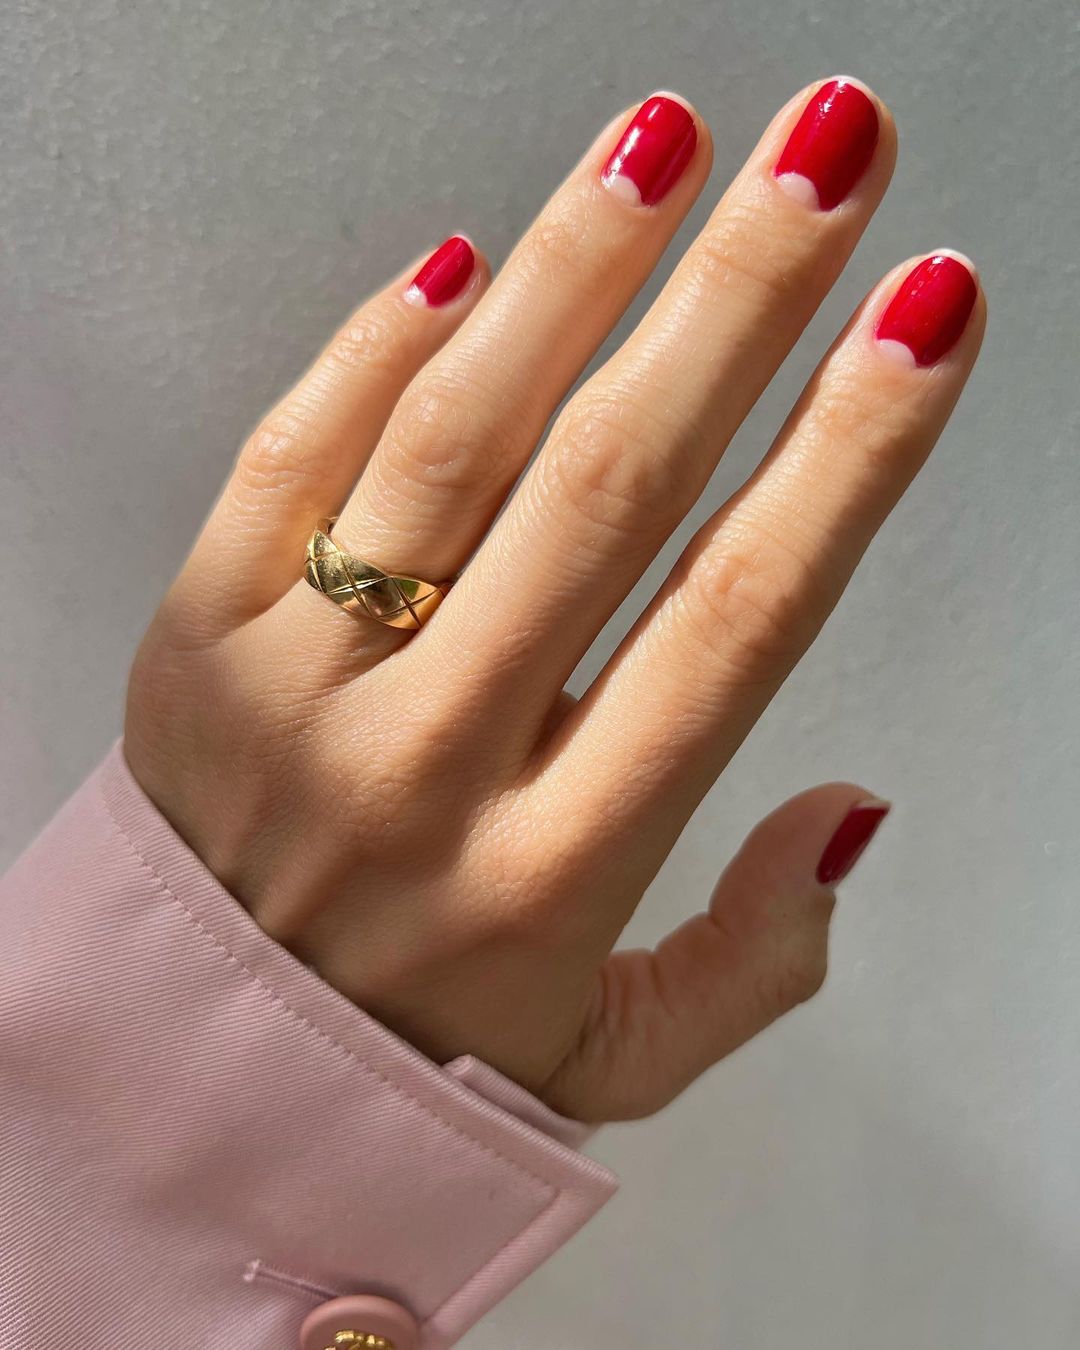 Nail Art Ideas: Red with pink